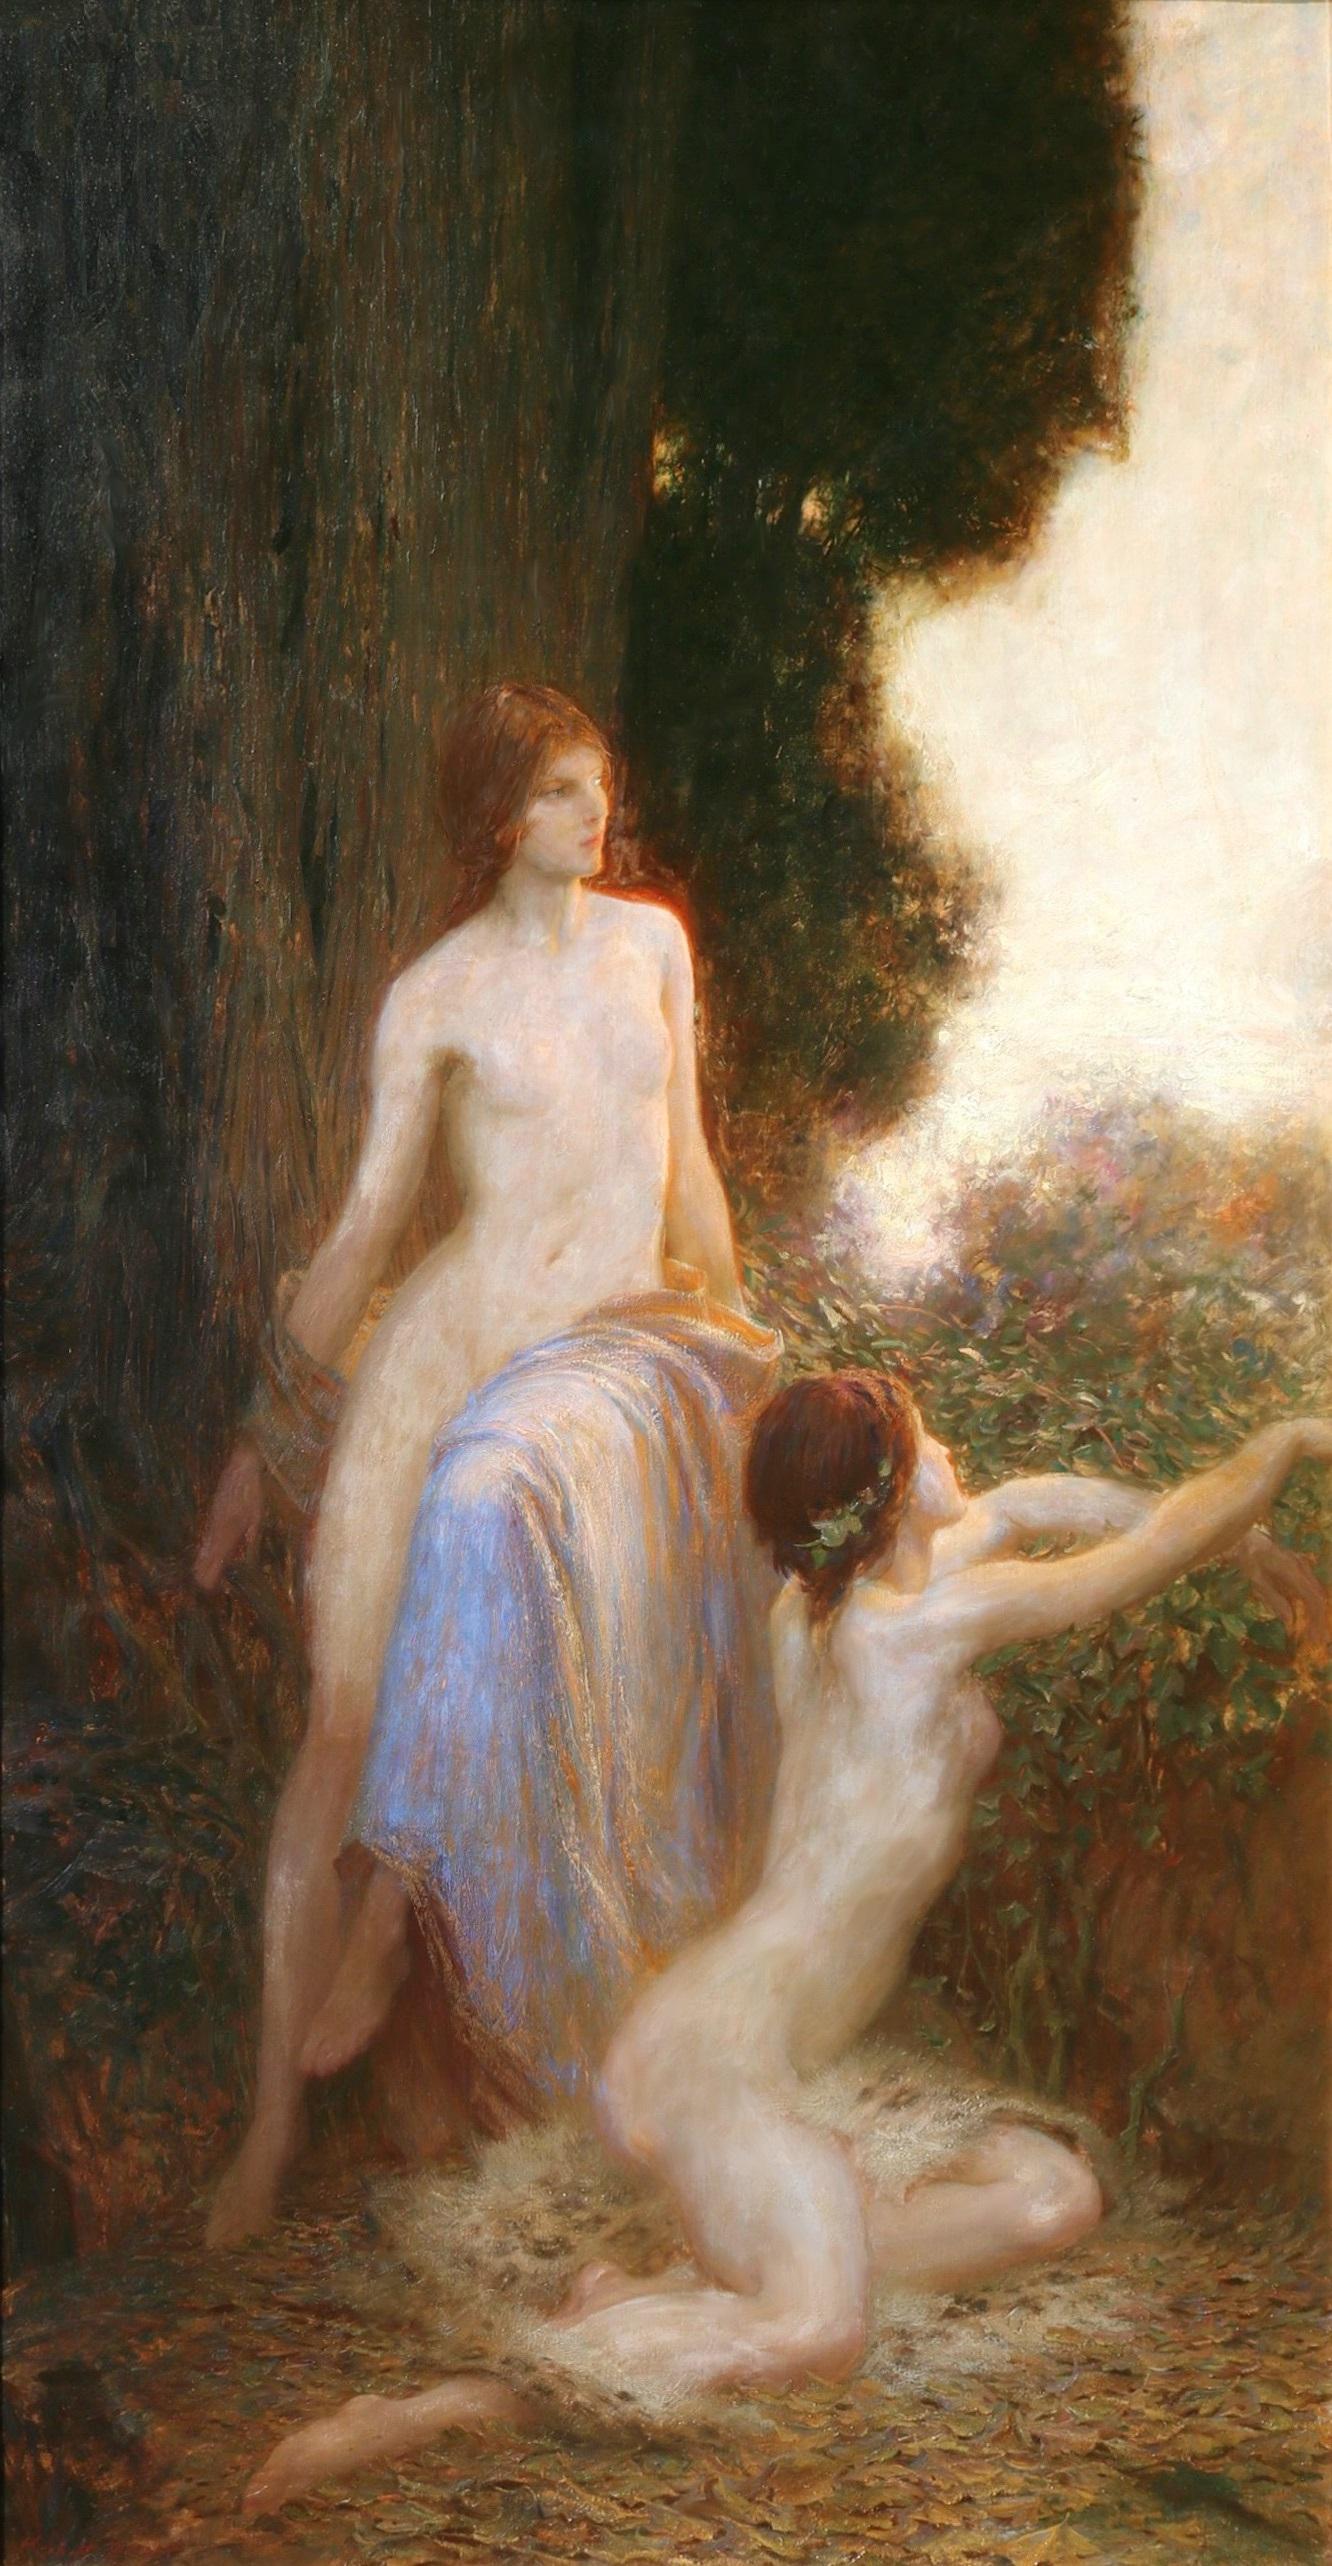 ‘Awakening’ by Herbert James Draper (1864-1920).

This monumental oil painting – which depicts two wood nymphs rising to meet the morning sun – is signed by the artist and dated 1918 in which year it was exhibited at the Royal Academy in London.  